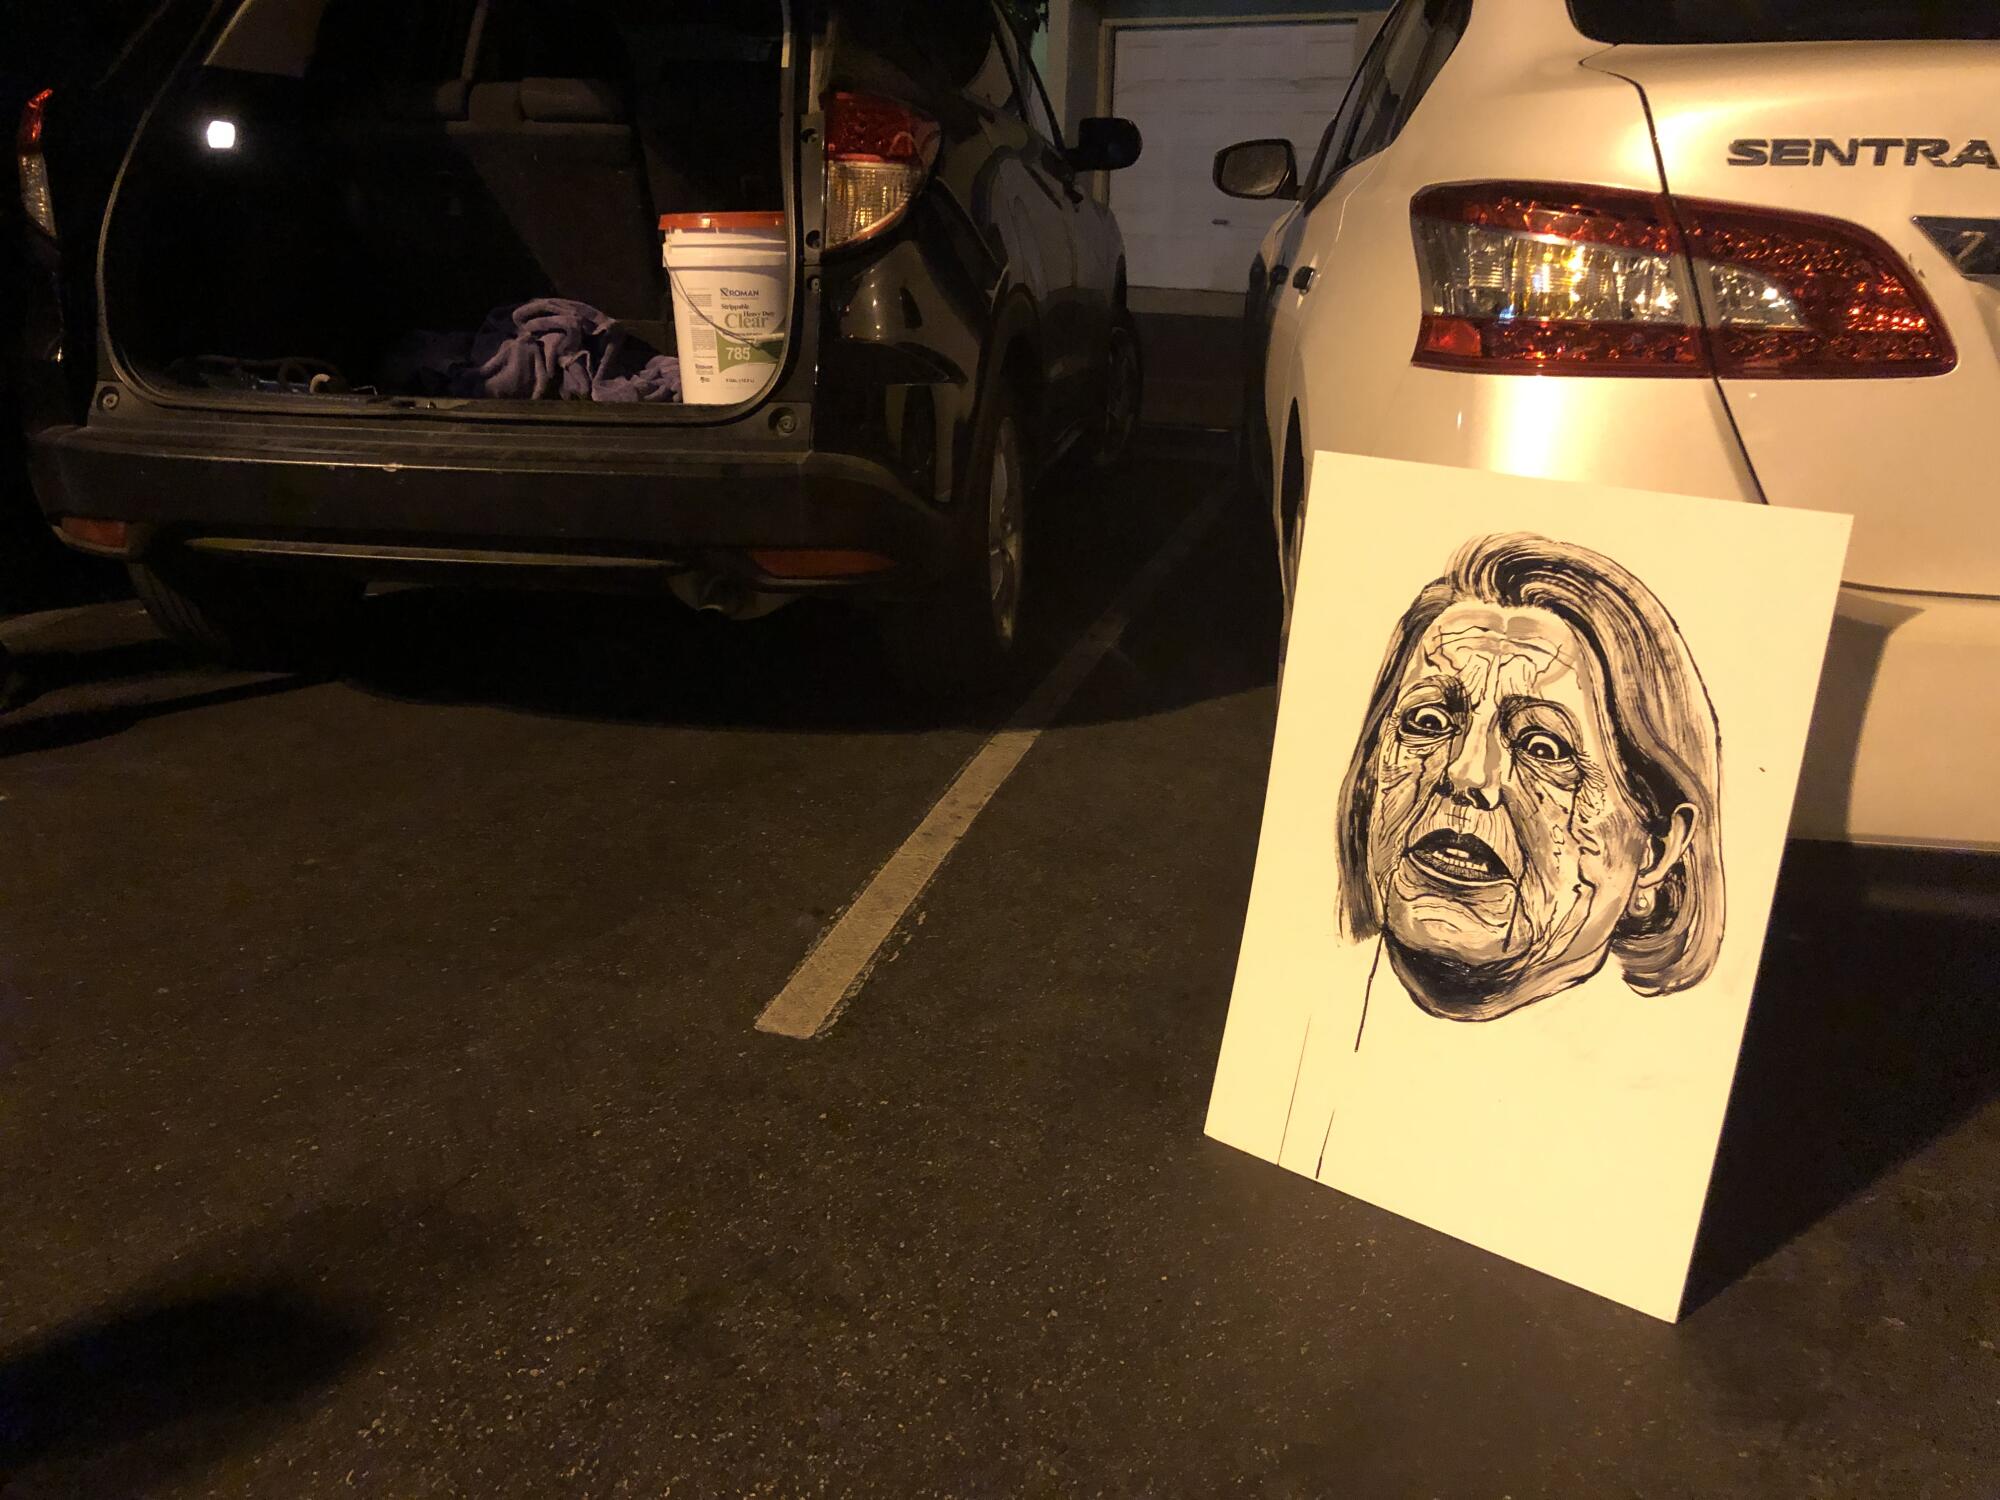 A white poster featuring a caricature of Ginni Thomas' face rests against a car bumper in a parking lot.